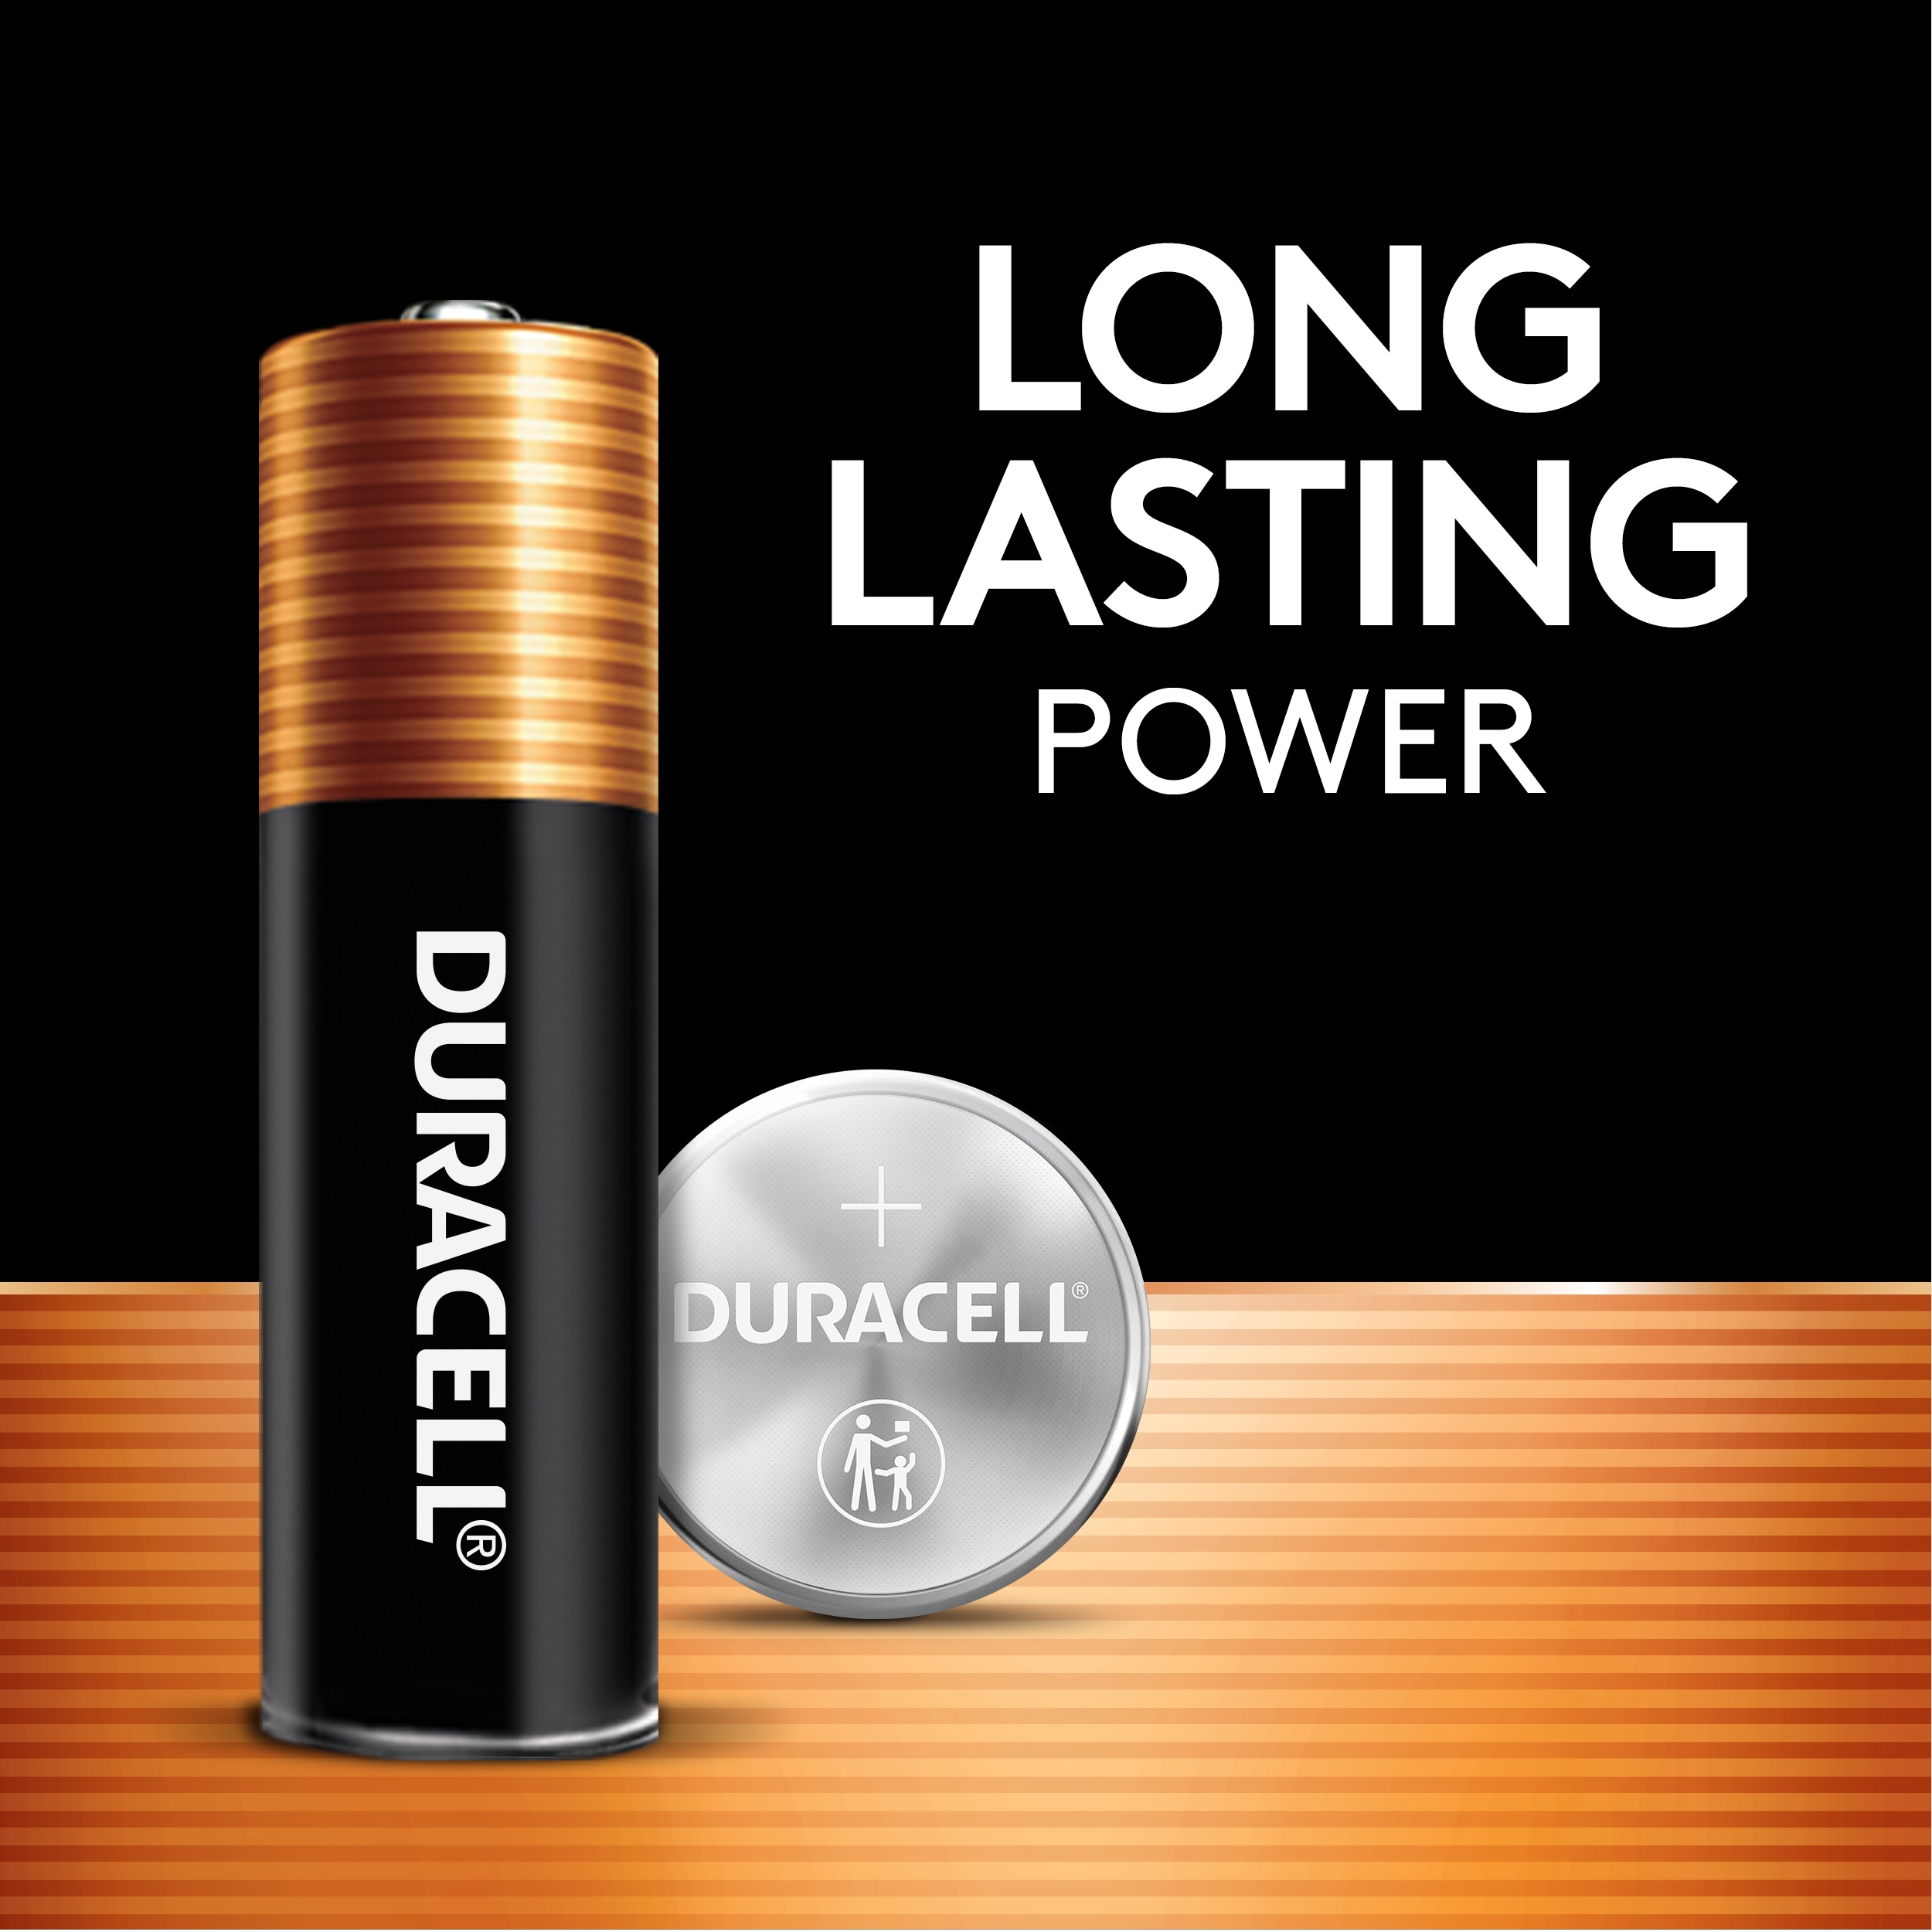 Duracell Ultra Lithium Battery CR2 - 1 ea, Pack of 6